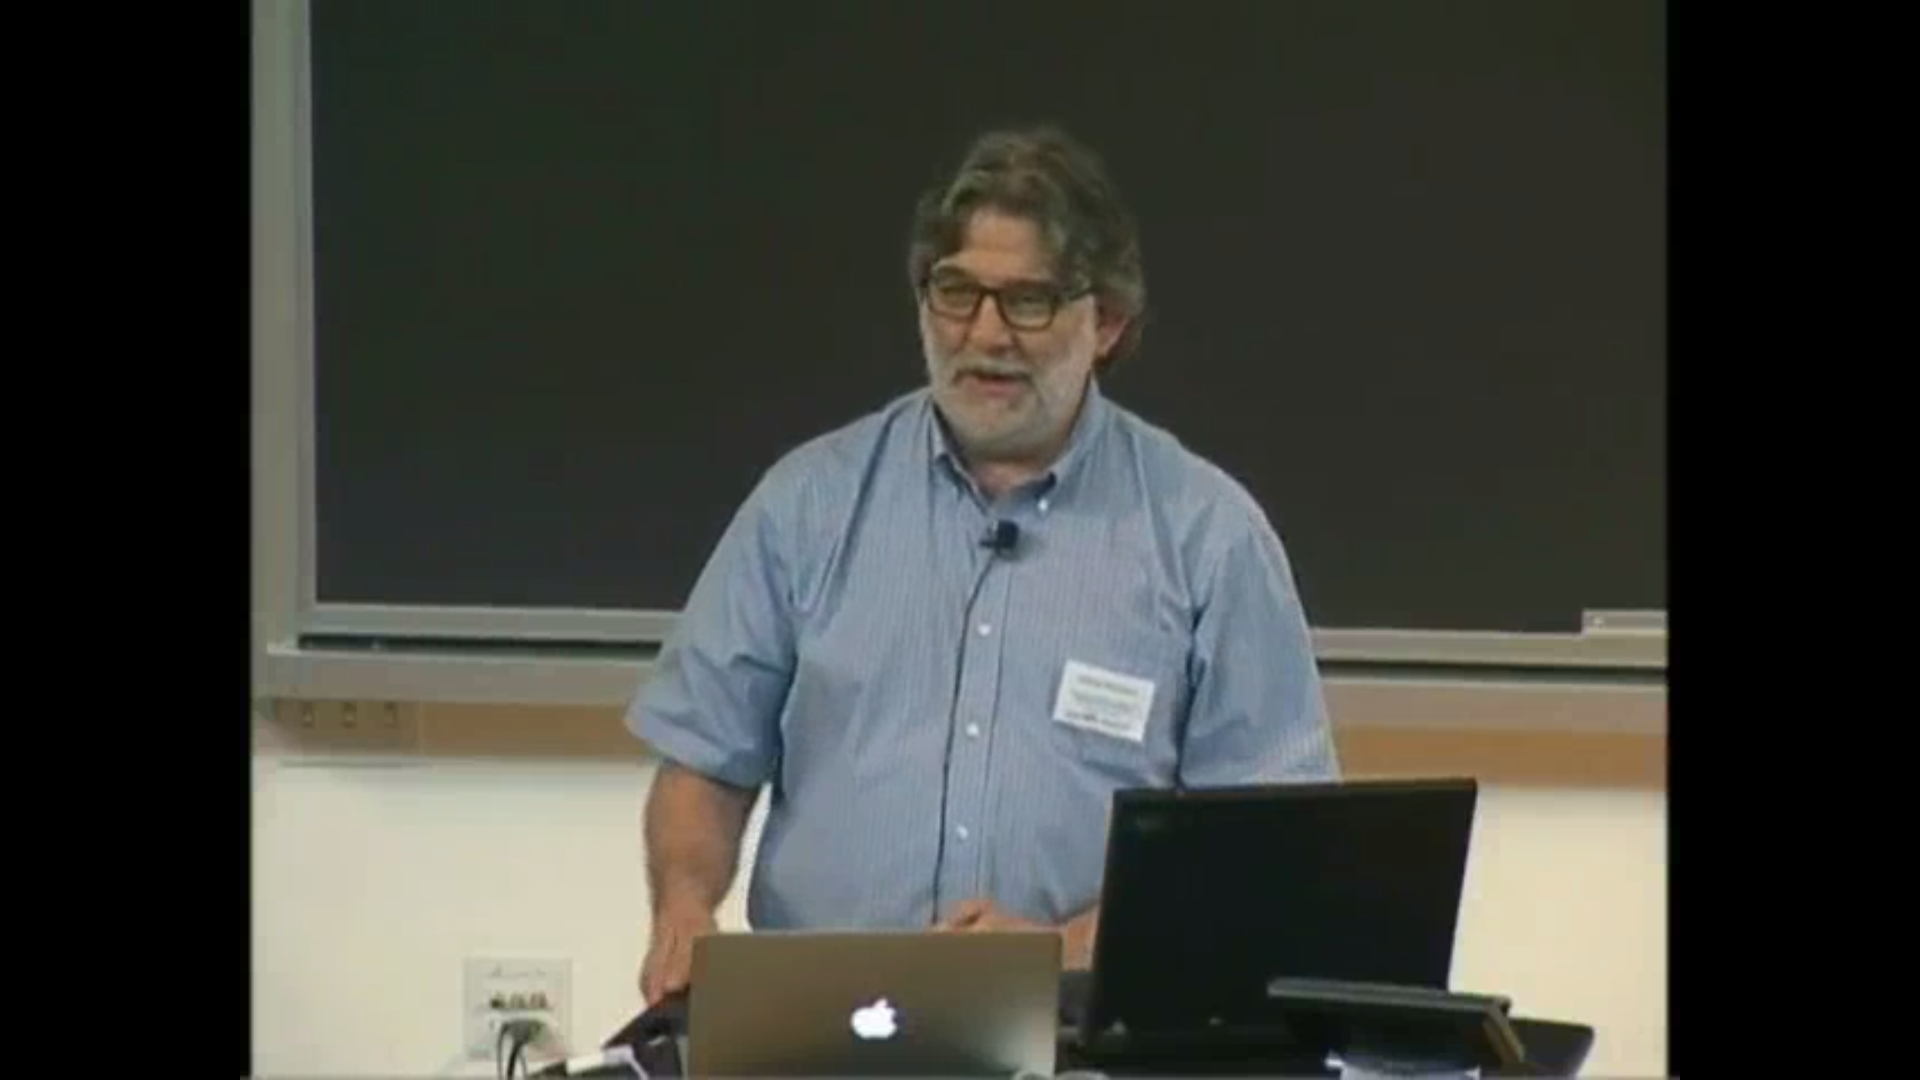 Critical Issues In Mathematics Education 2011: Mathematical Education of Teachers, lecture 1 - The Impact of the Common Core State Standards on the Education and Professional Development of Teachers Thumbnail